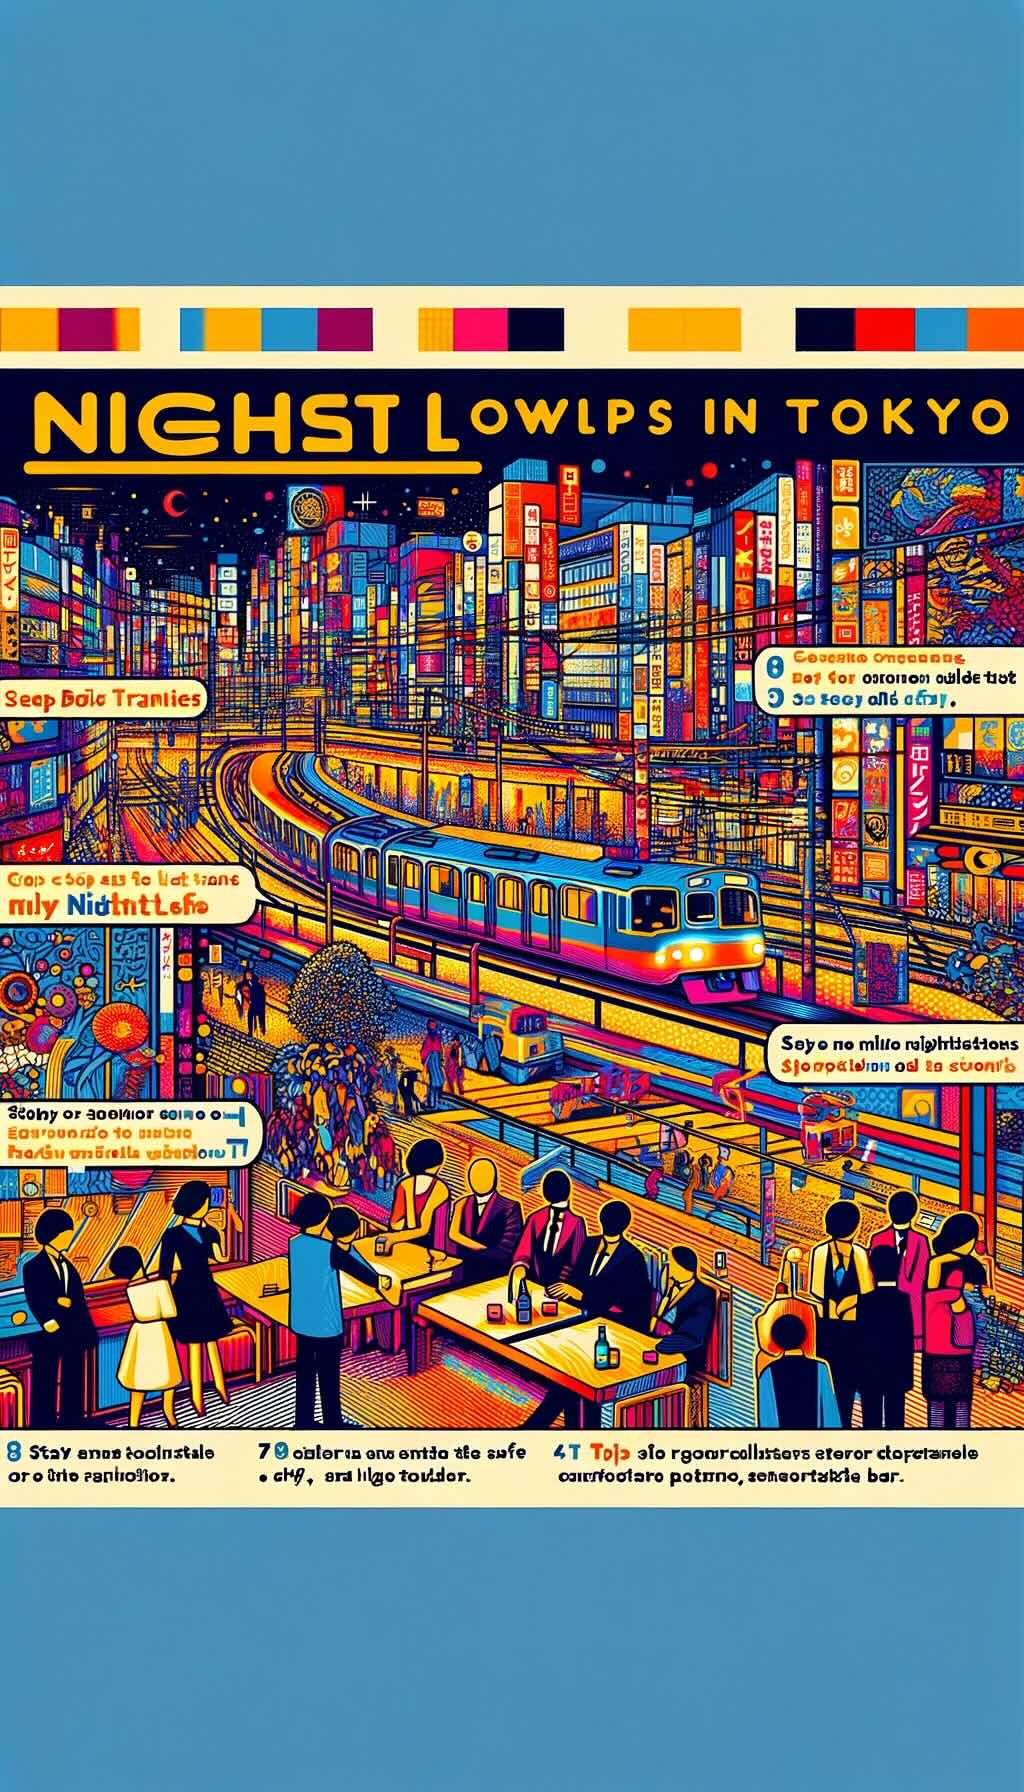 Tips for night owls in Tokyo captures the essence of Tokyo's nightlife, including scenes of people catching the last trains, the lively streets of entertainment districts, solo travelers navigating the city, and the tranquil atmosphere of a traditional bar. The abstract and colorful artwork reflects the vibrant and diverse nature of Tokyo's nightlife, providing visual cues on how to enjoy nocturnal adventures in the city safely and respectfully. The dynamic energy of Tokyo at night and the importance of understanding its culture and nuances are effectively conveyed through this imaginative representation